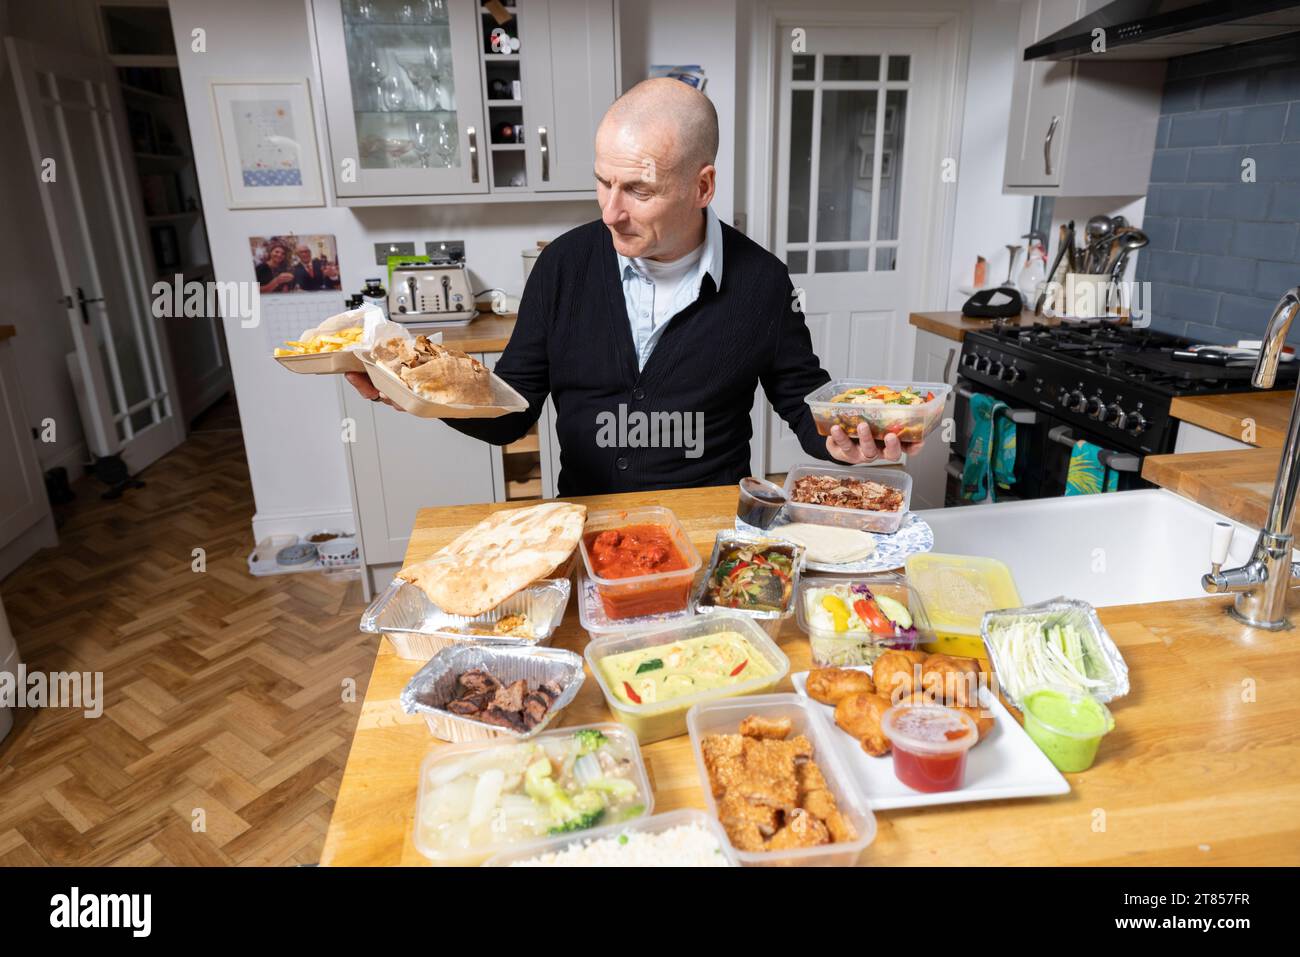 Man at home with section of take-away food on his kitchen work top, London, England, United Kingdom Stock Photo